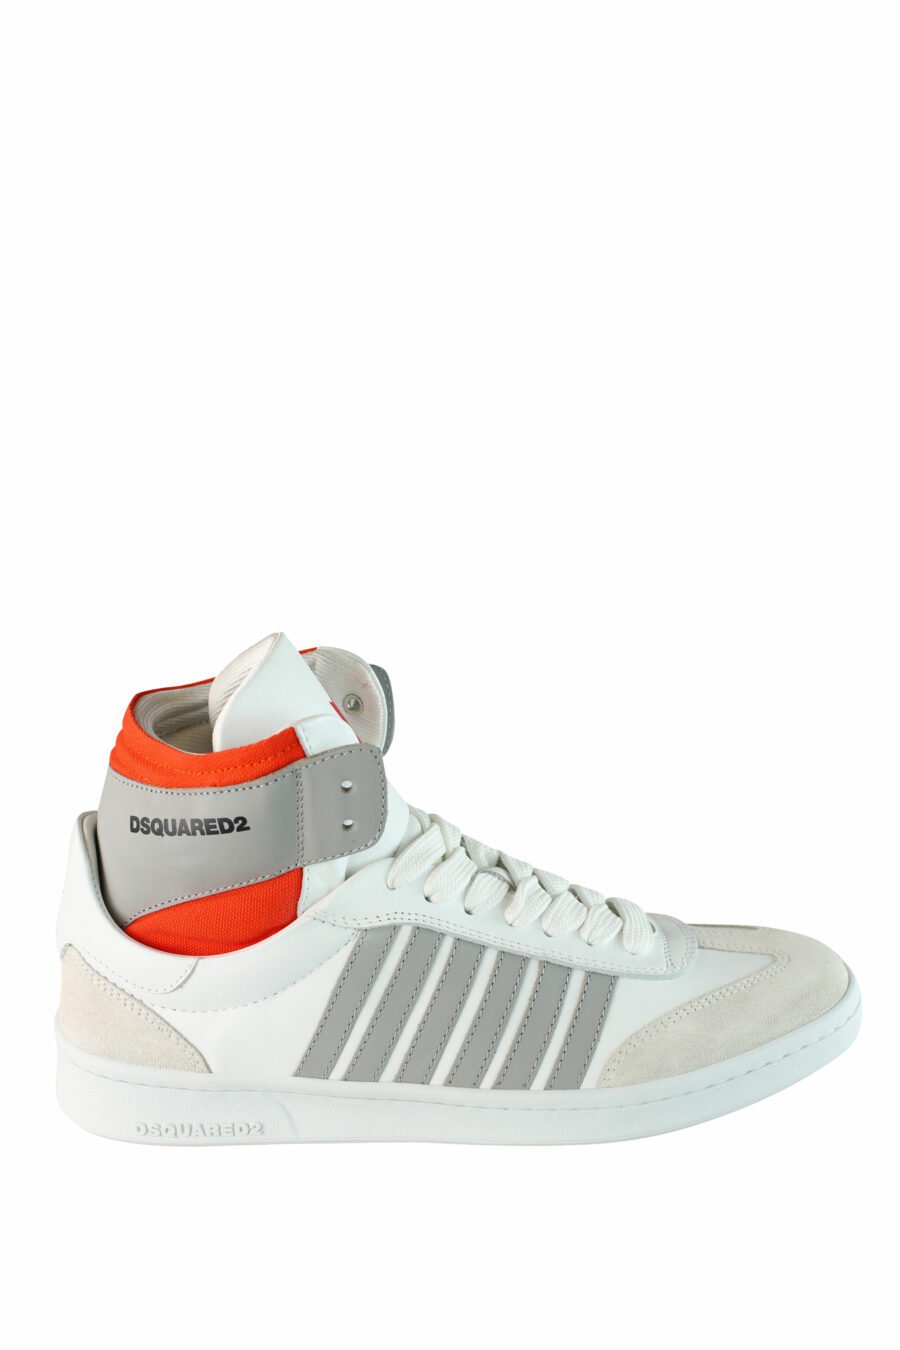 White mixed "boxer" bootie style trainers with orange and grey details - IMG 1501